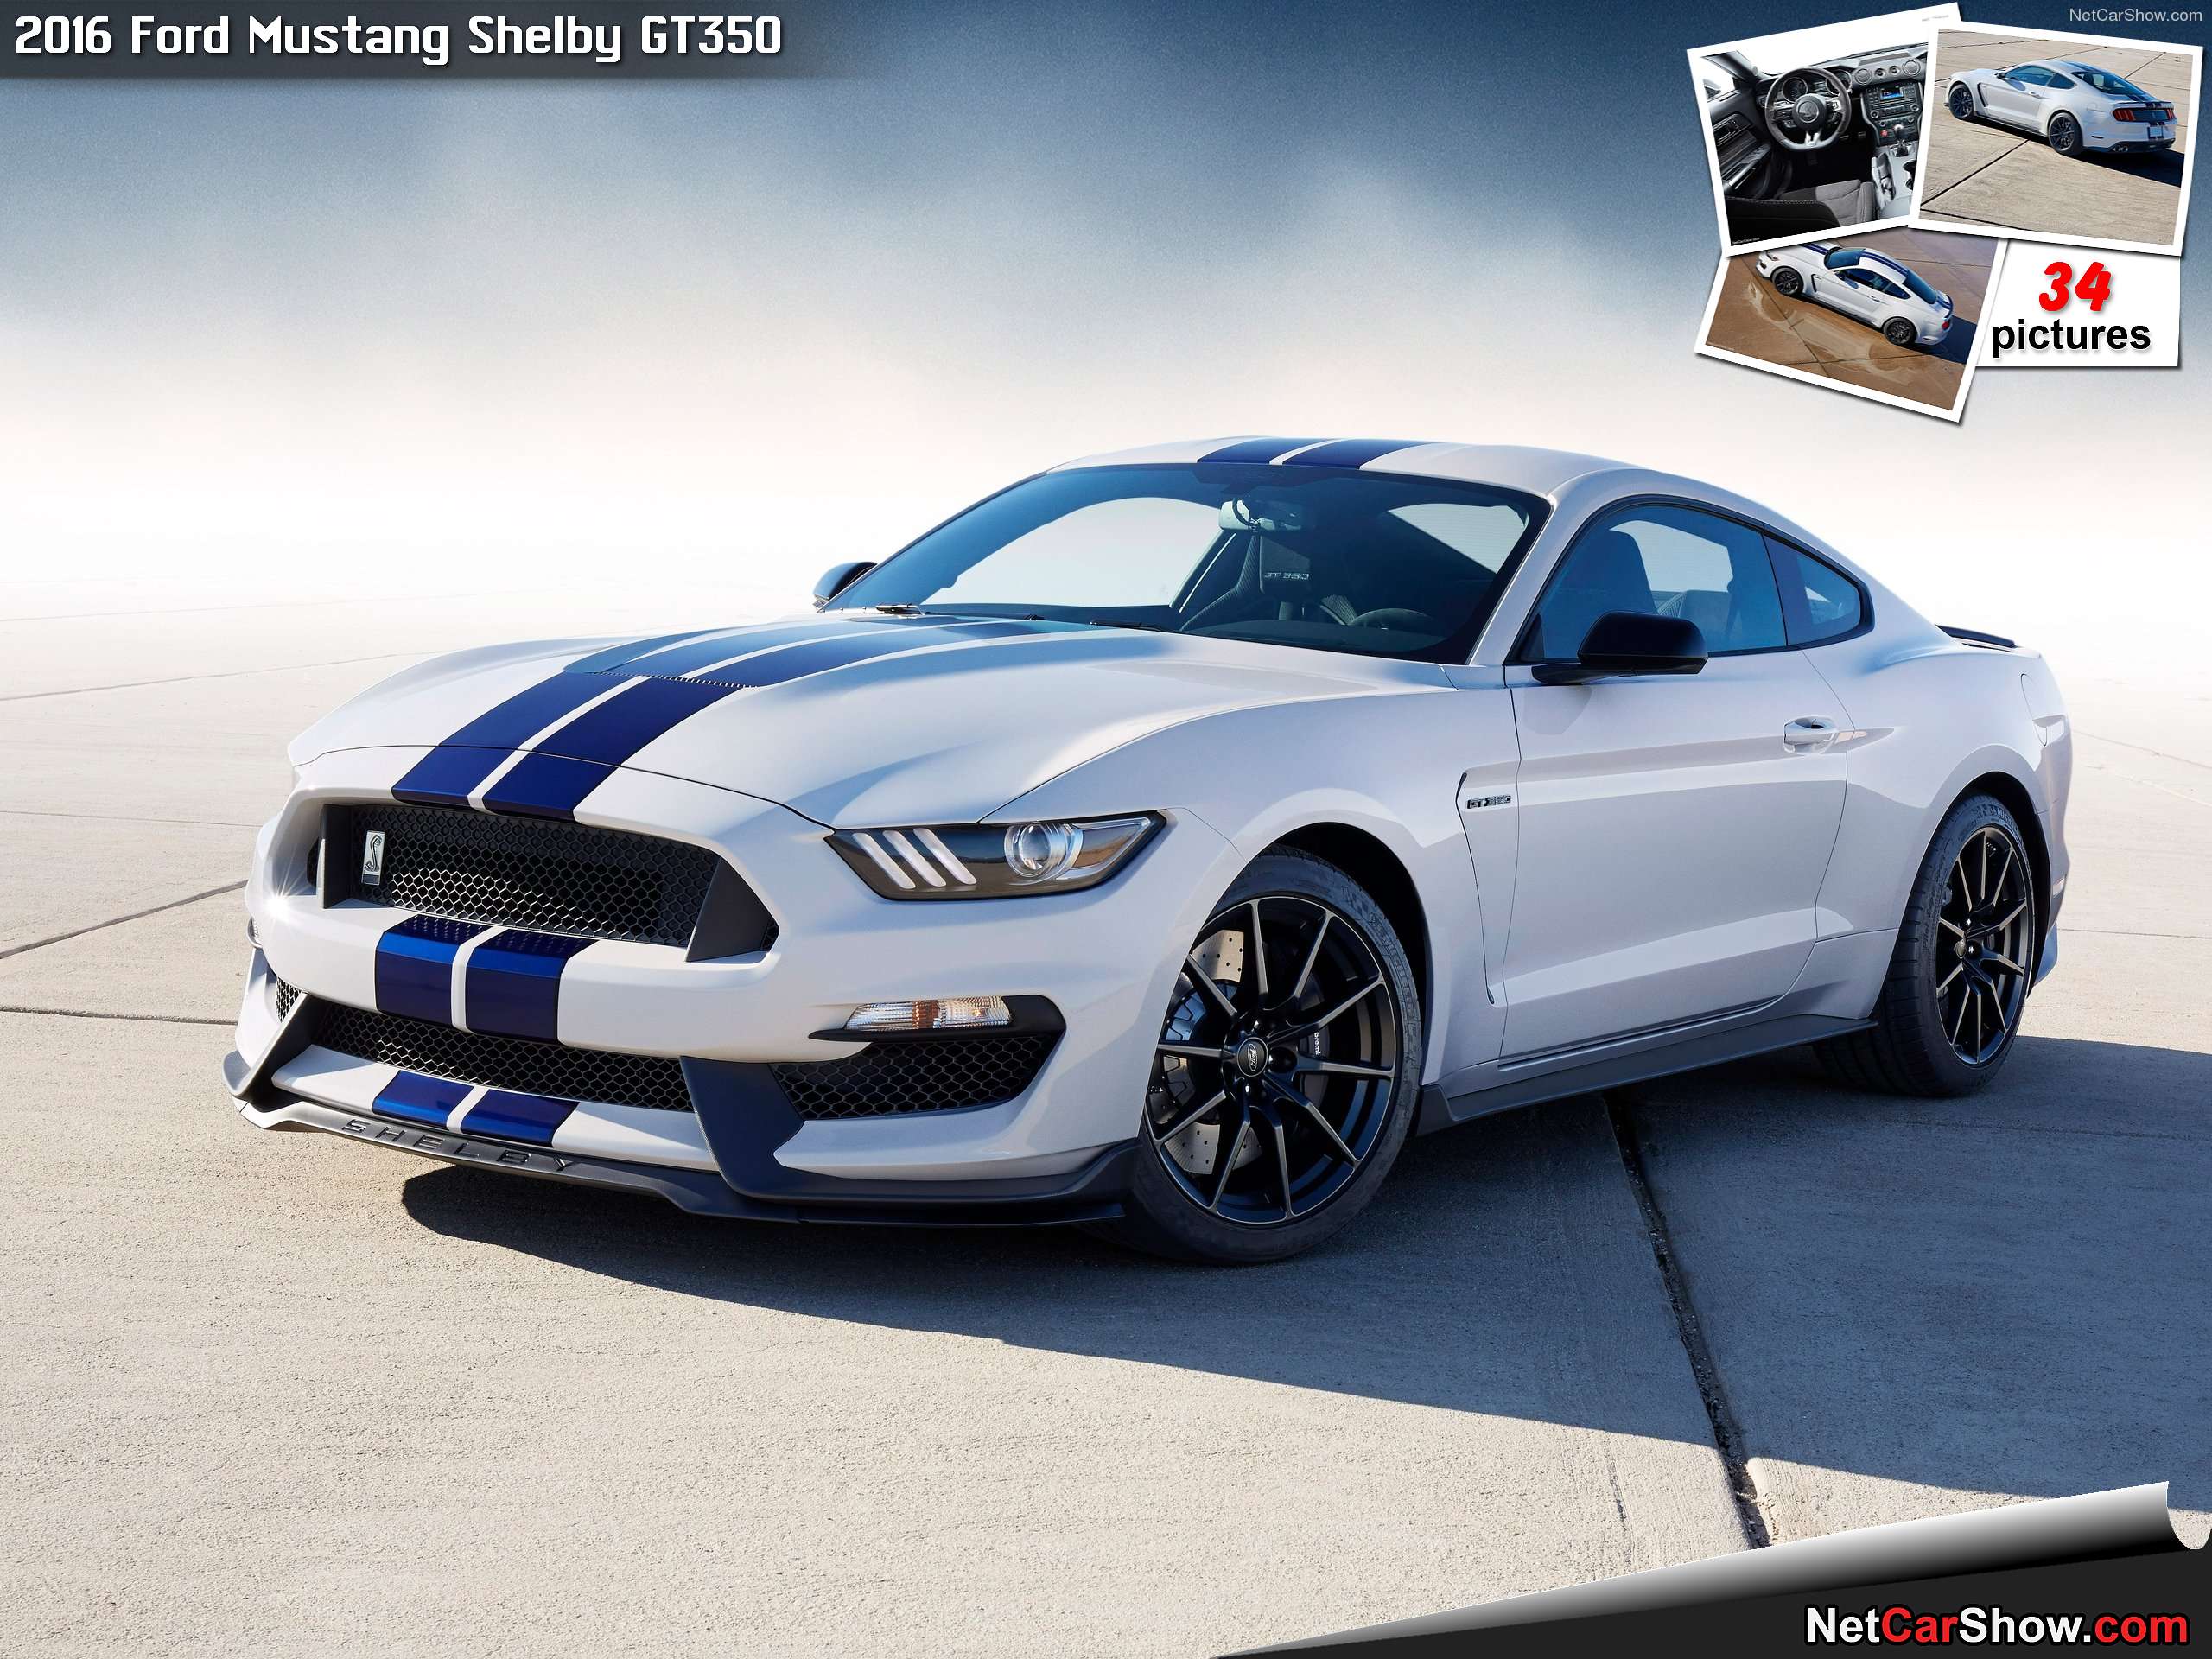 Ford-Mustang_Shelby_GT350-2016-hd.jpg